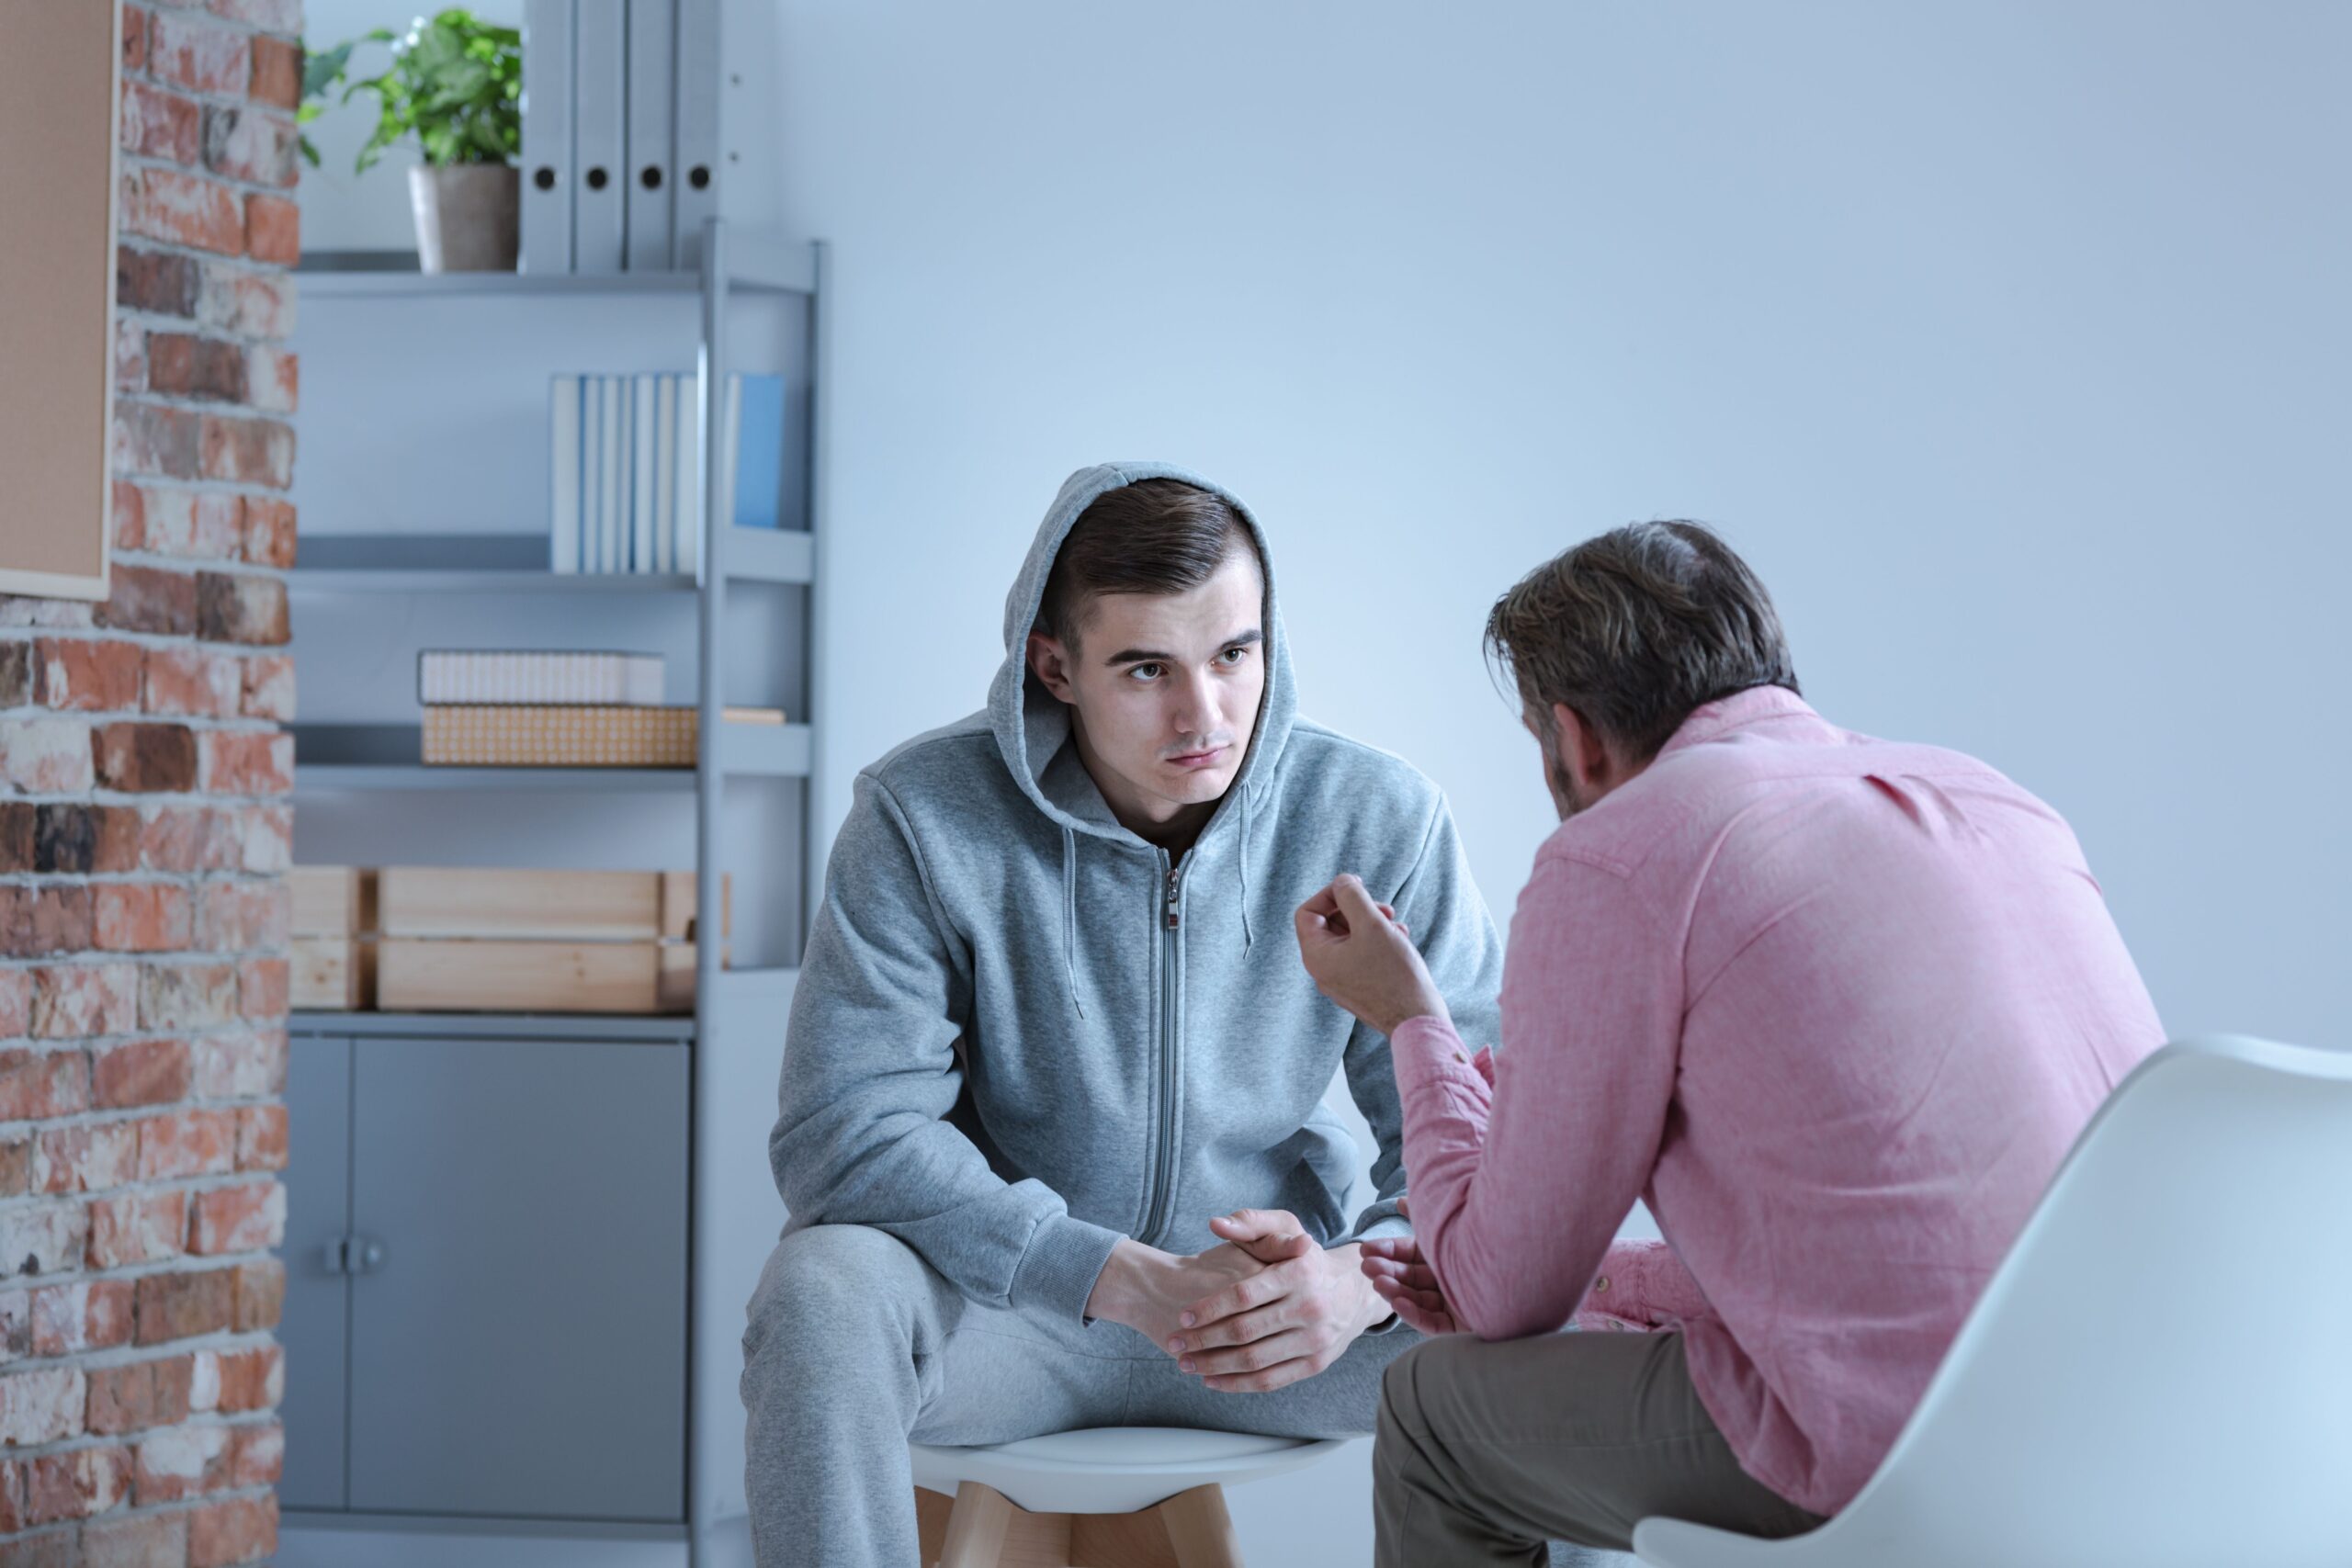 A middle age Caucasian man talks to a Caucasian teenaged boy wearing a grey sweat suit.